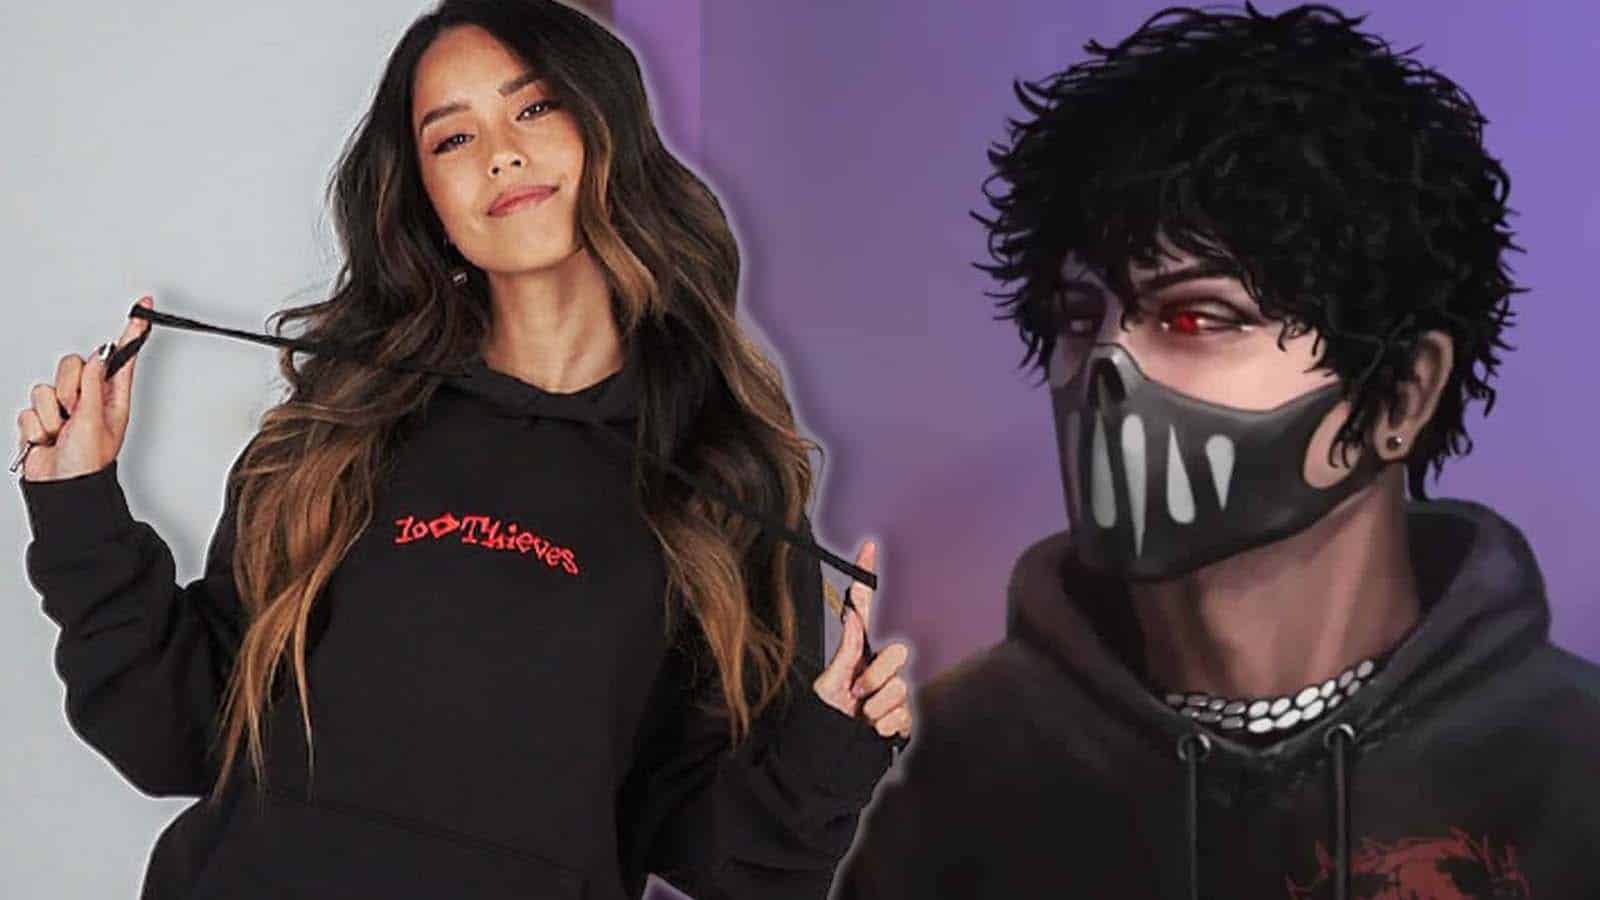 Valkyrae secretly met up with Corpse Husband and fans are losing it